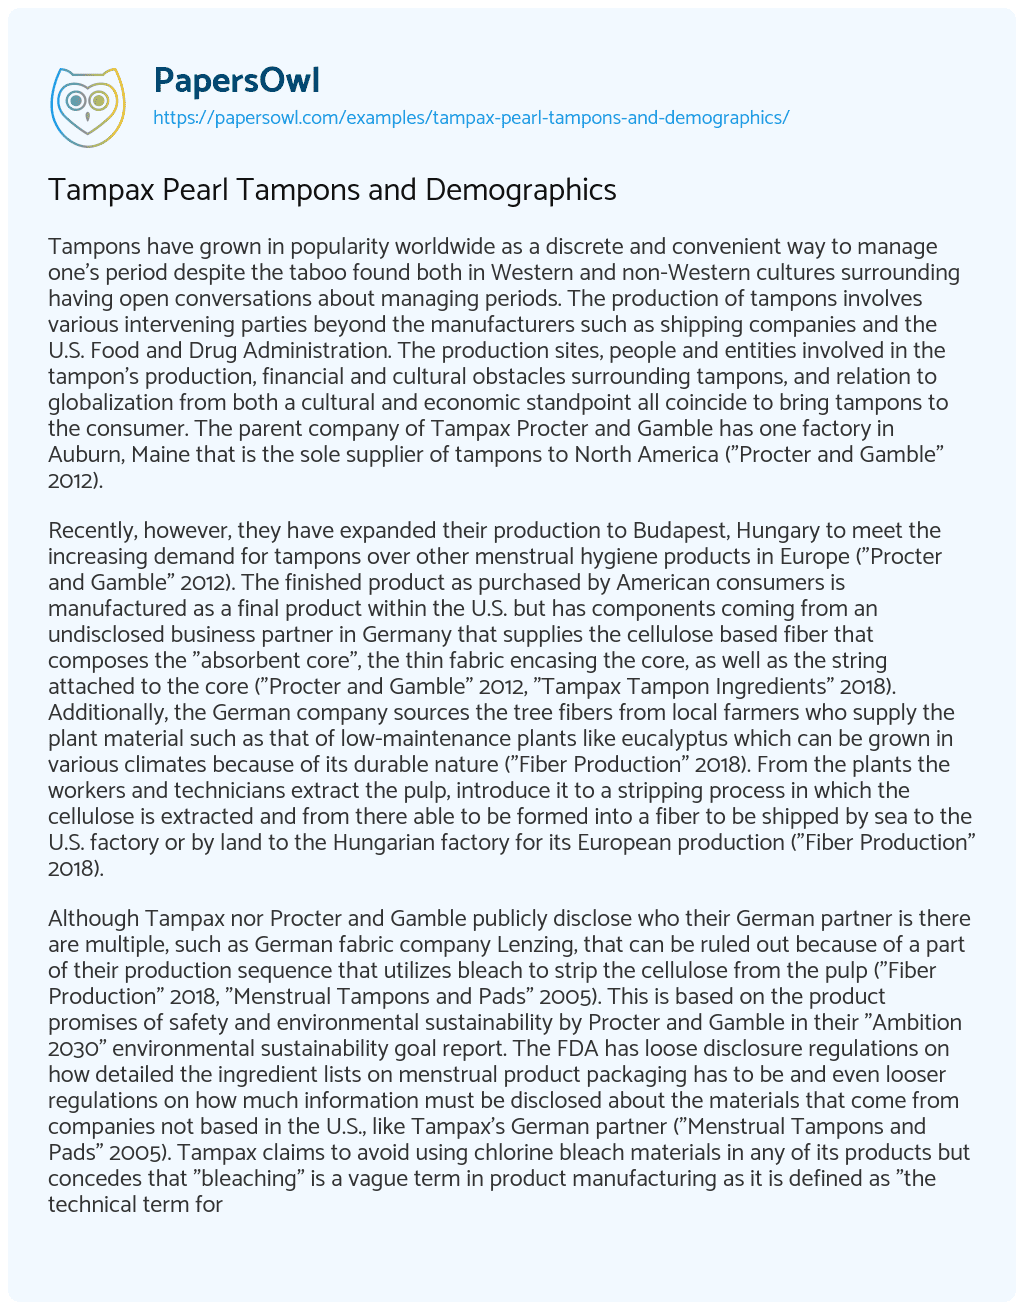 Essay on Tampax Pearl Tampons and Demographics